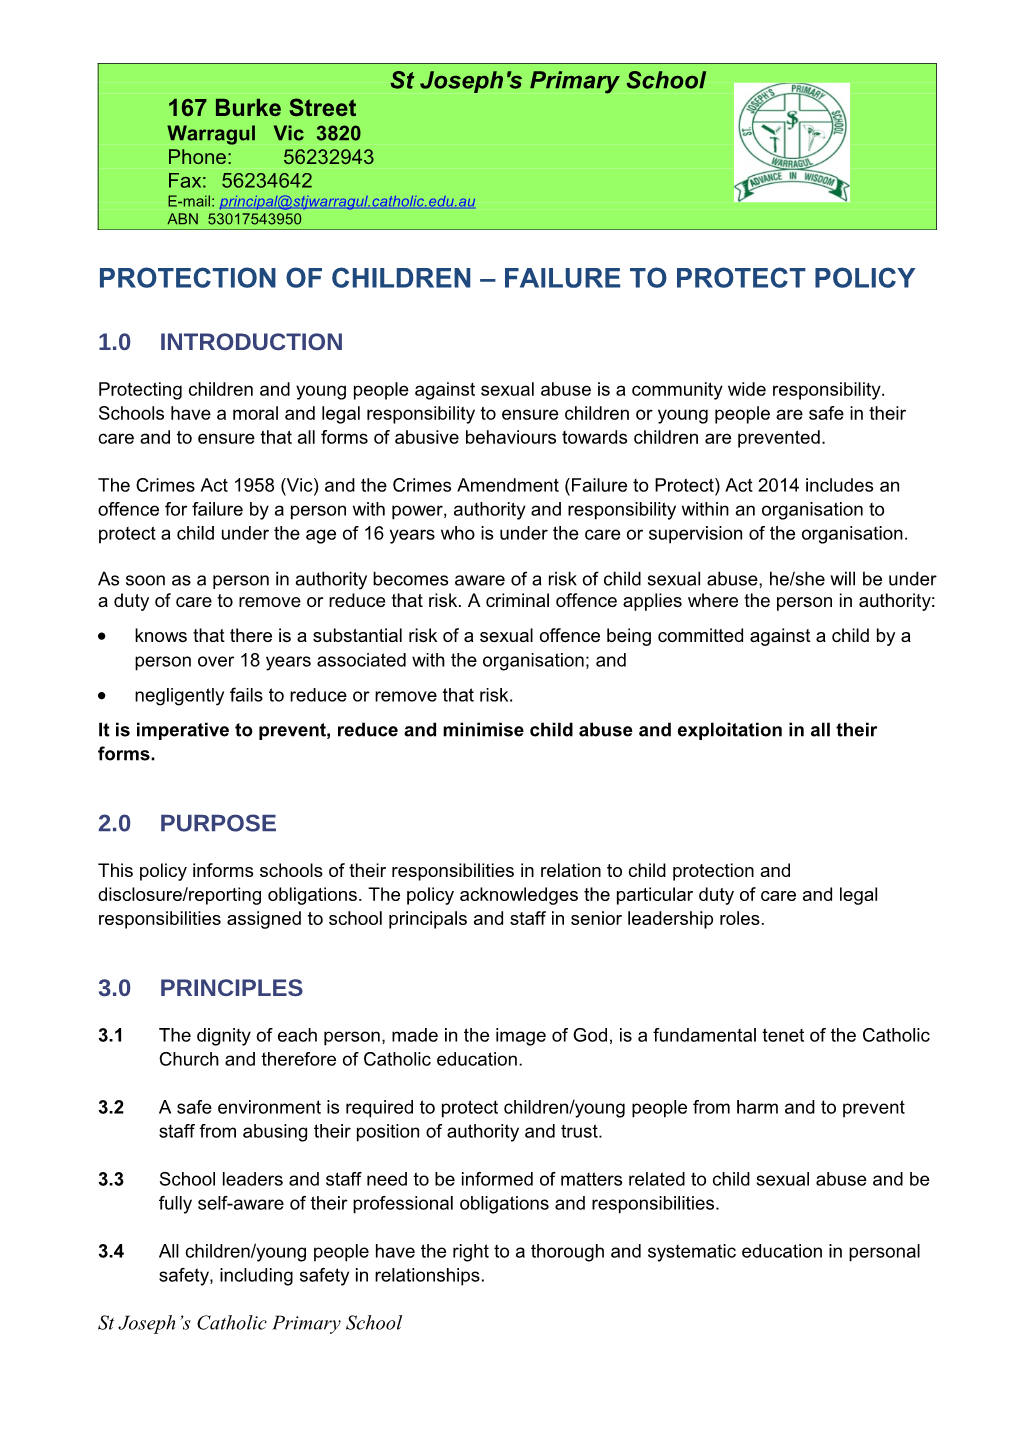 Protection of Children Failure to Protect Policy